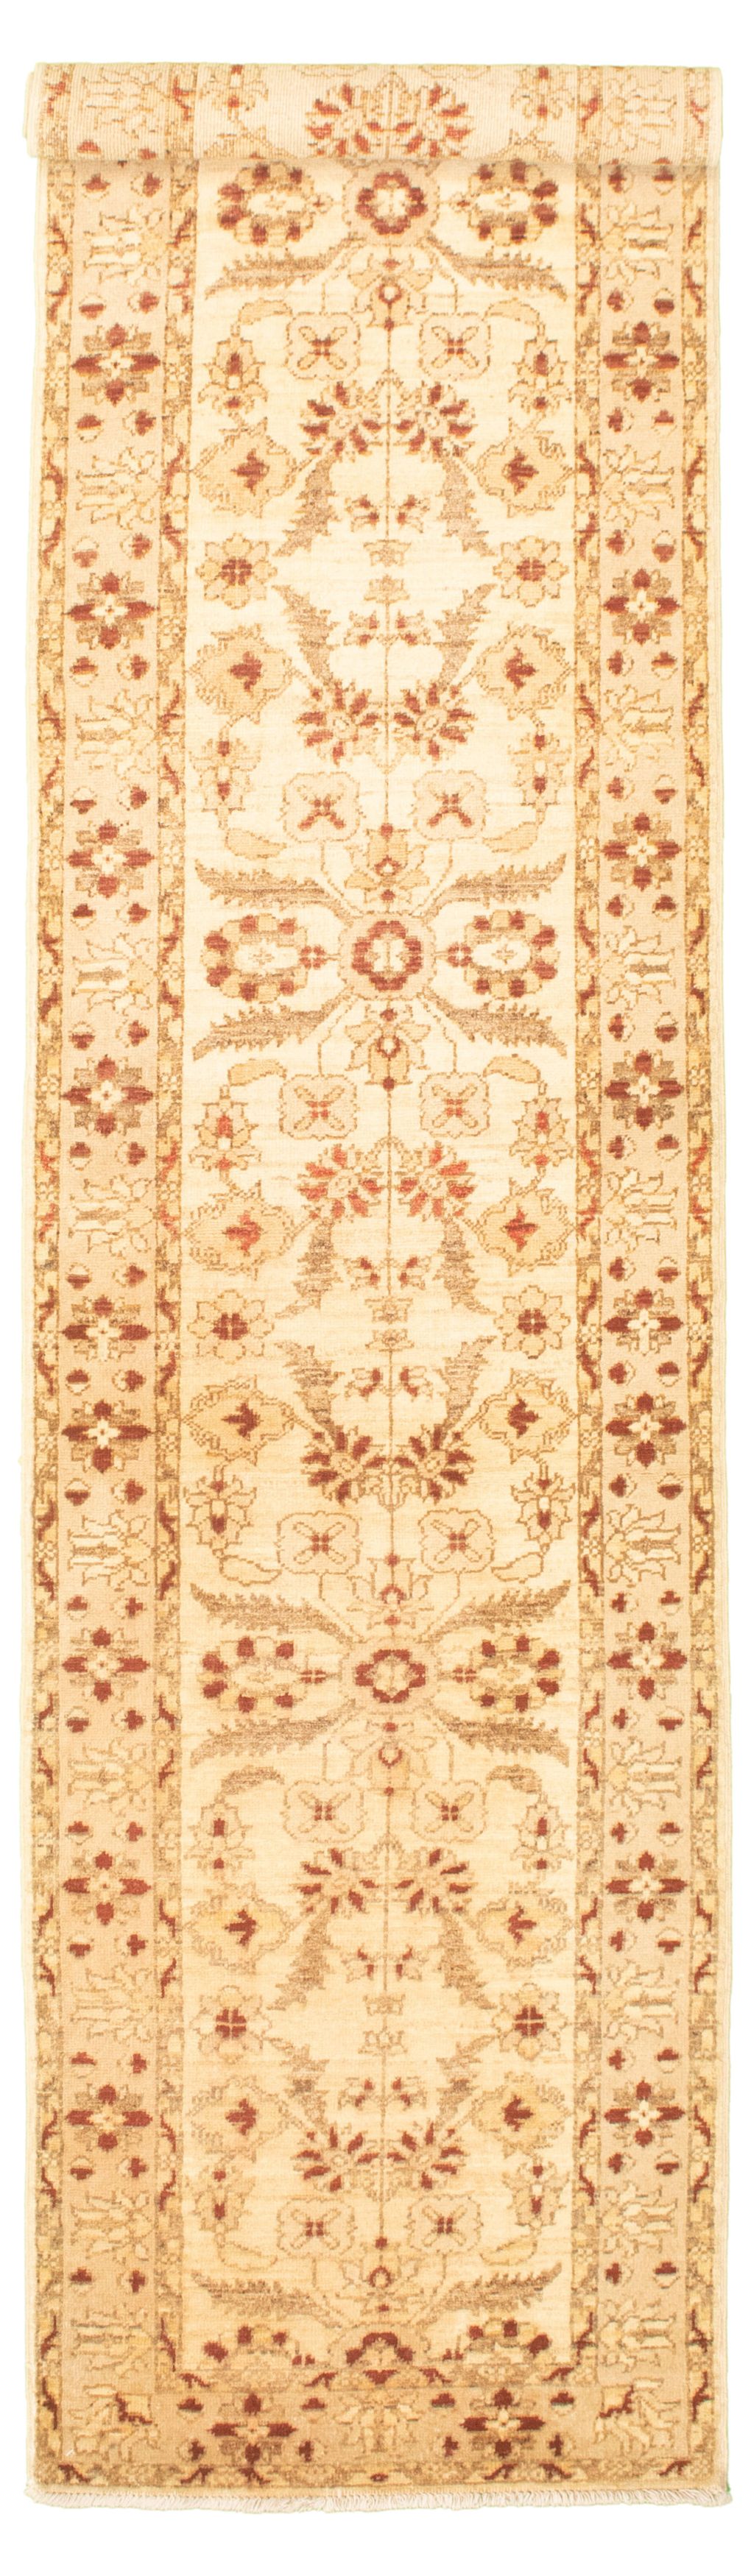 Hand-knotted Chobi Finest Cream Wool Rug 2'7" x 9'10"  Size: 2'7" x 9'10"  